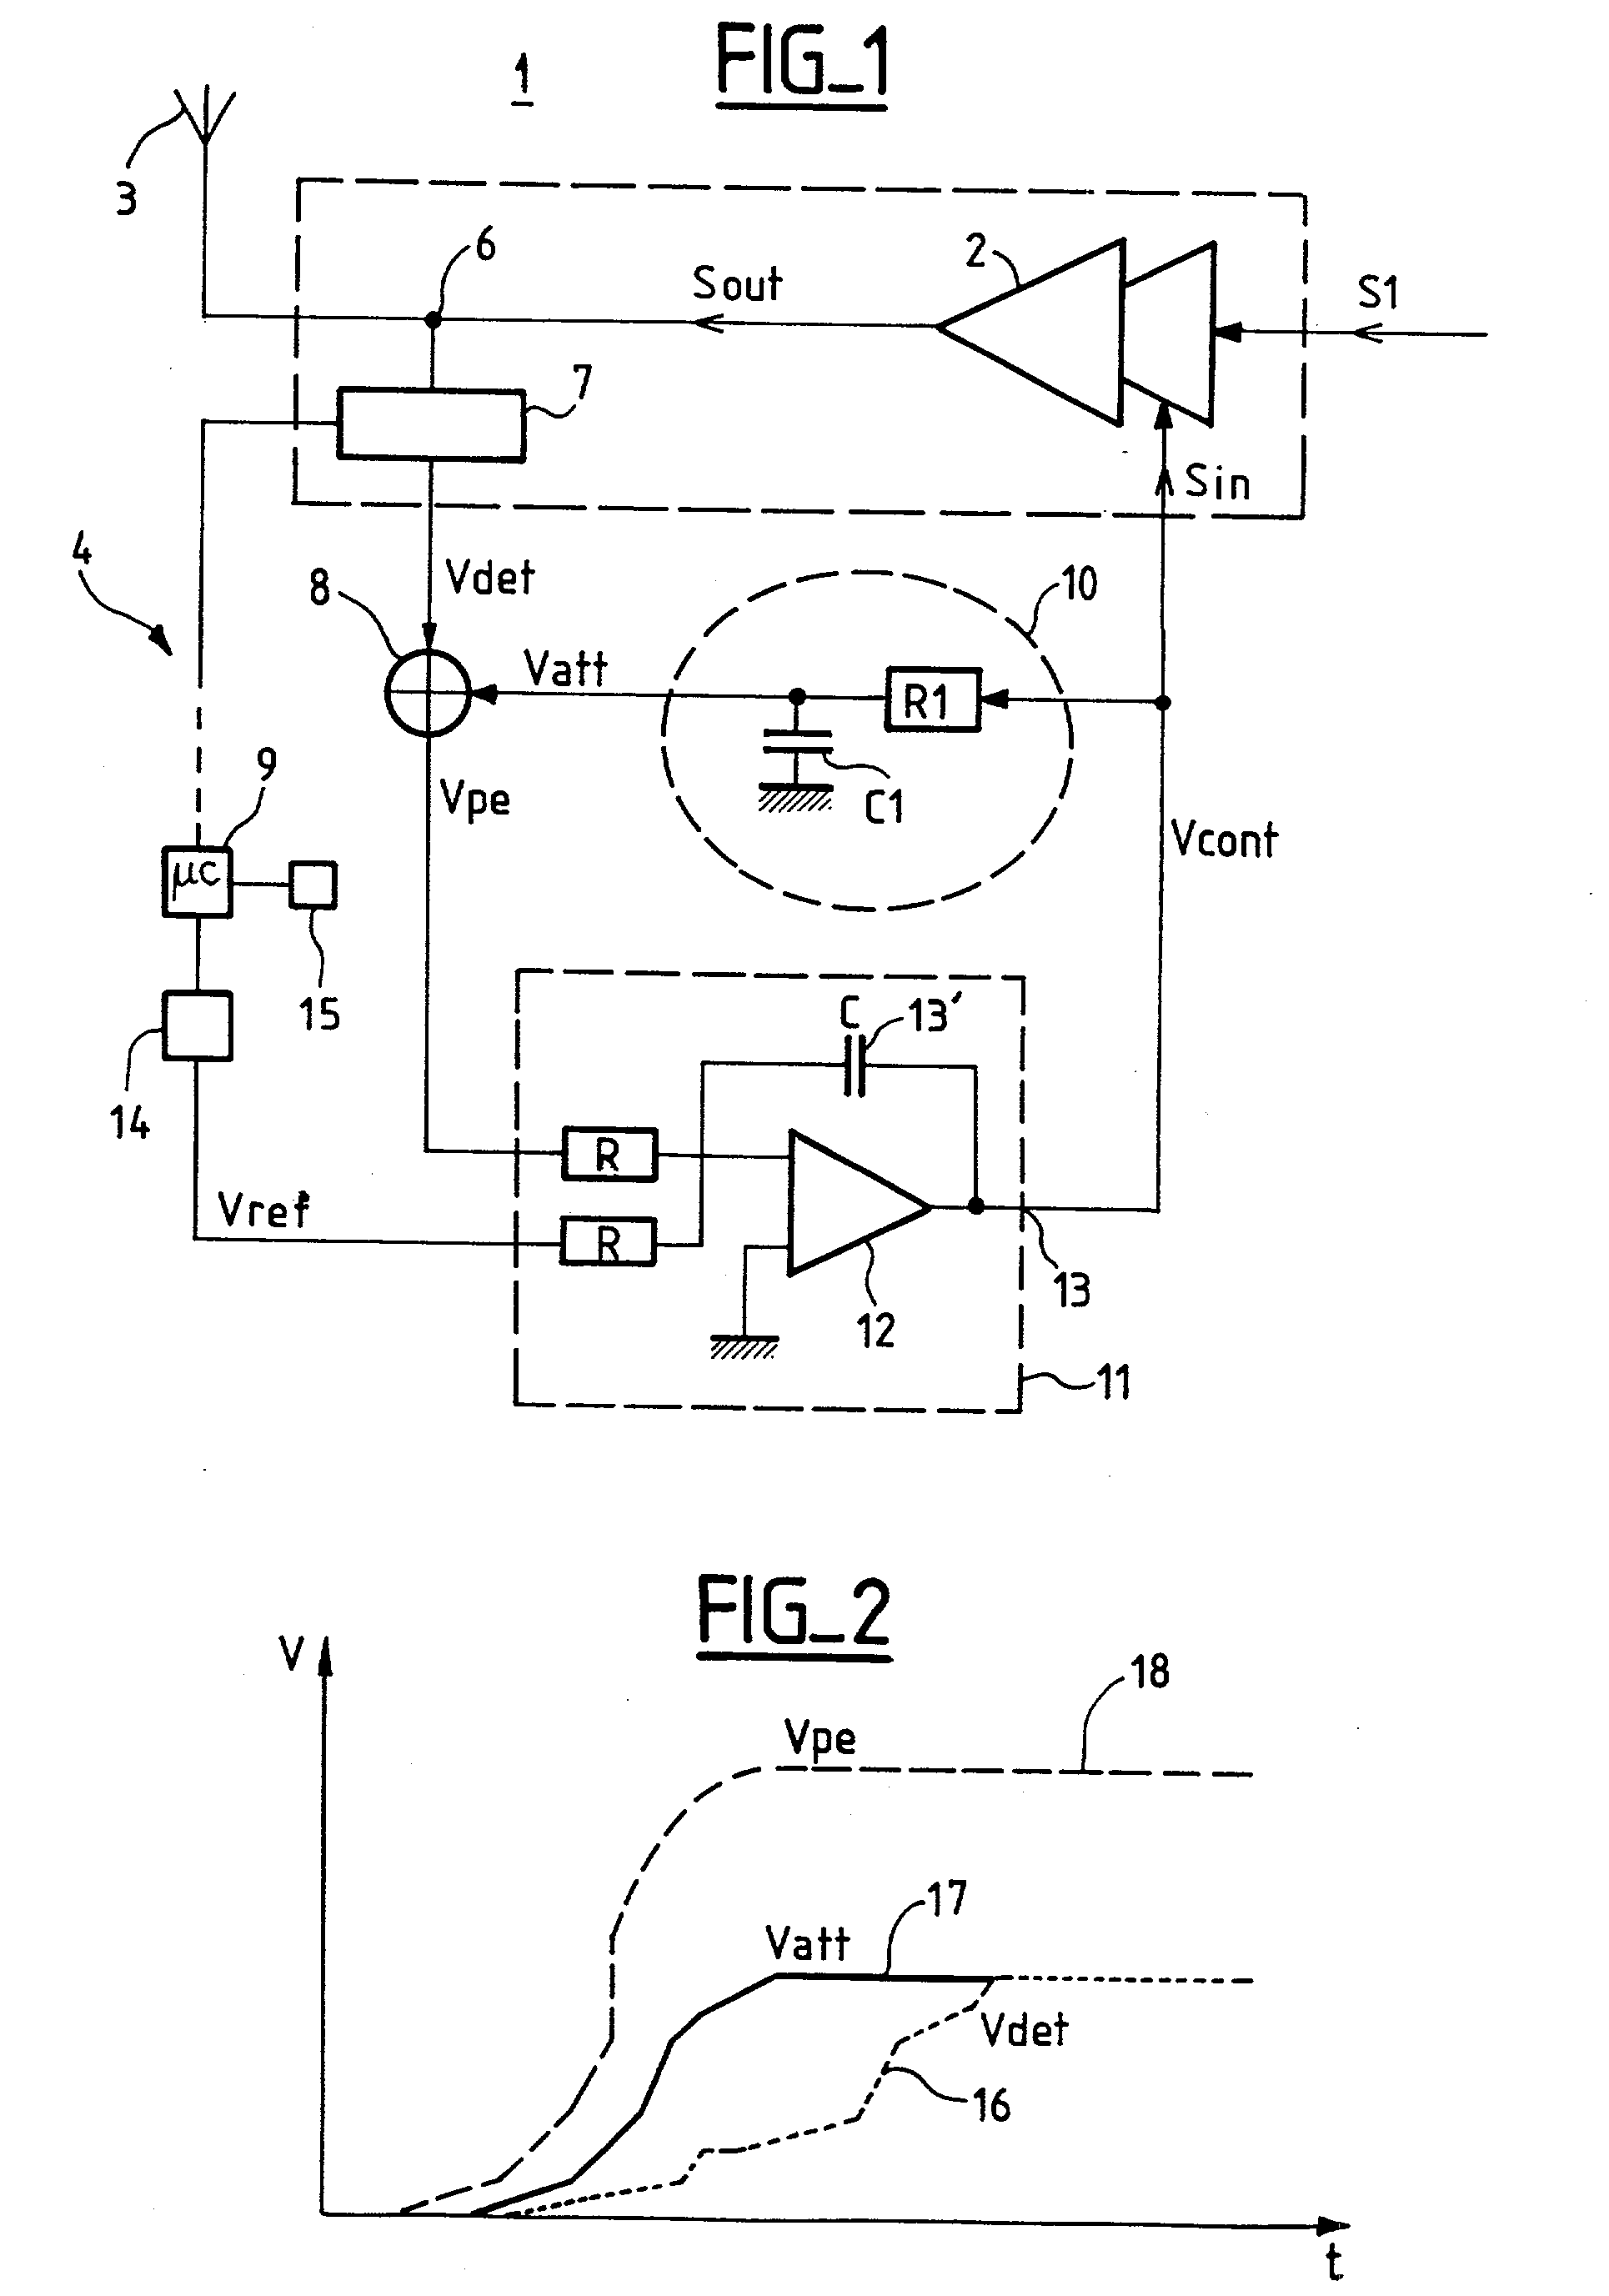 Regulator device for controlling the power of a transmitter